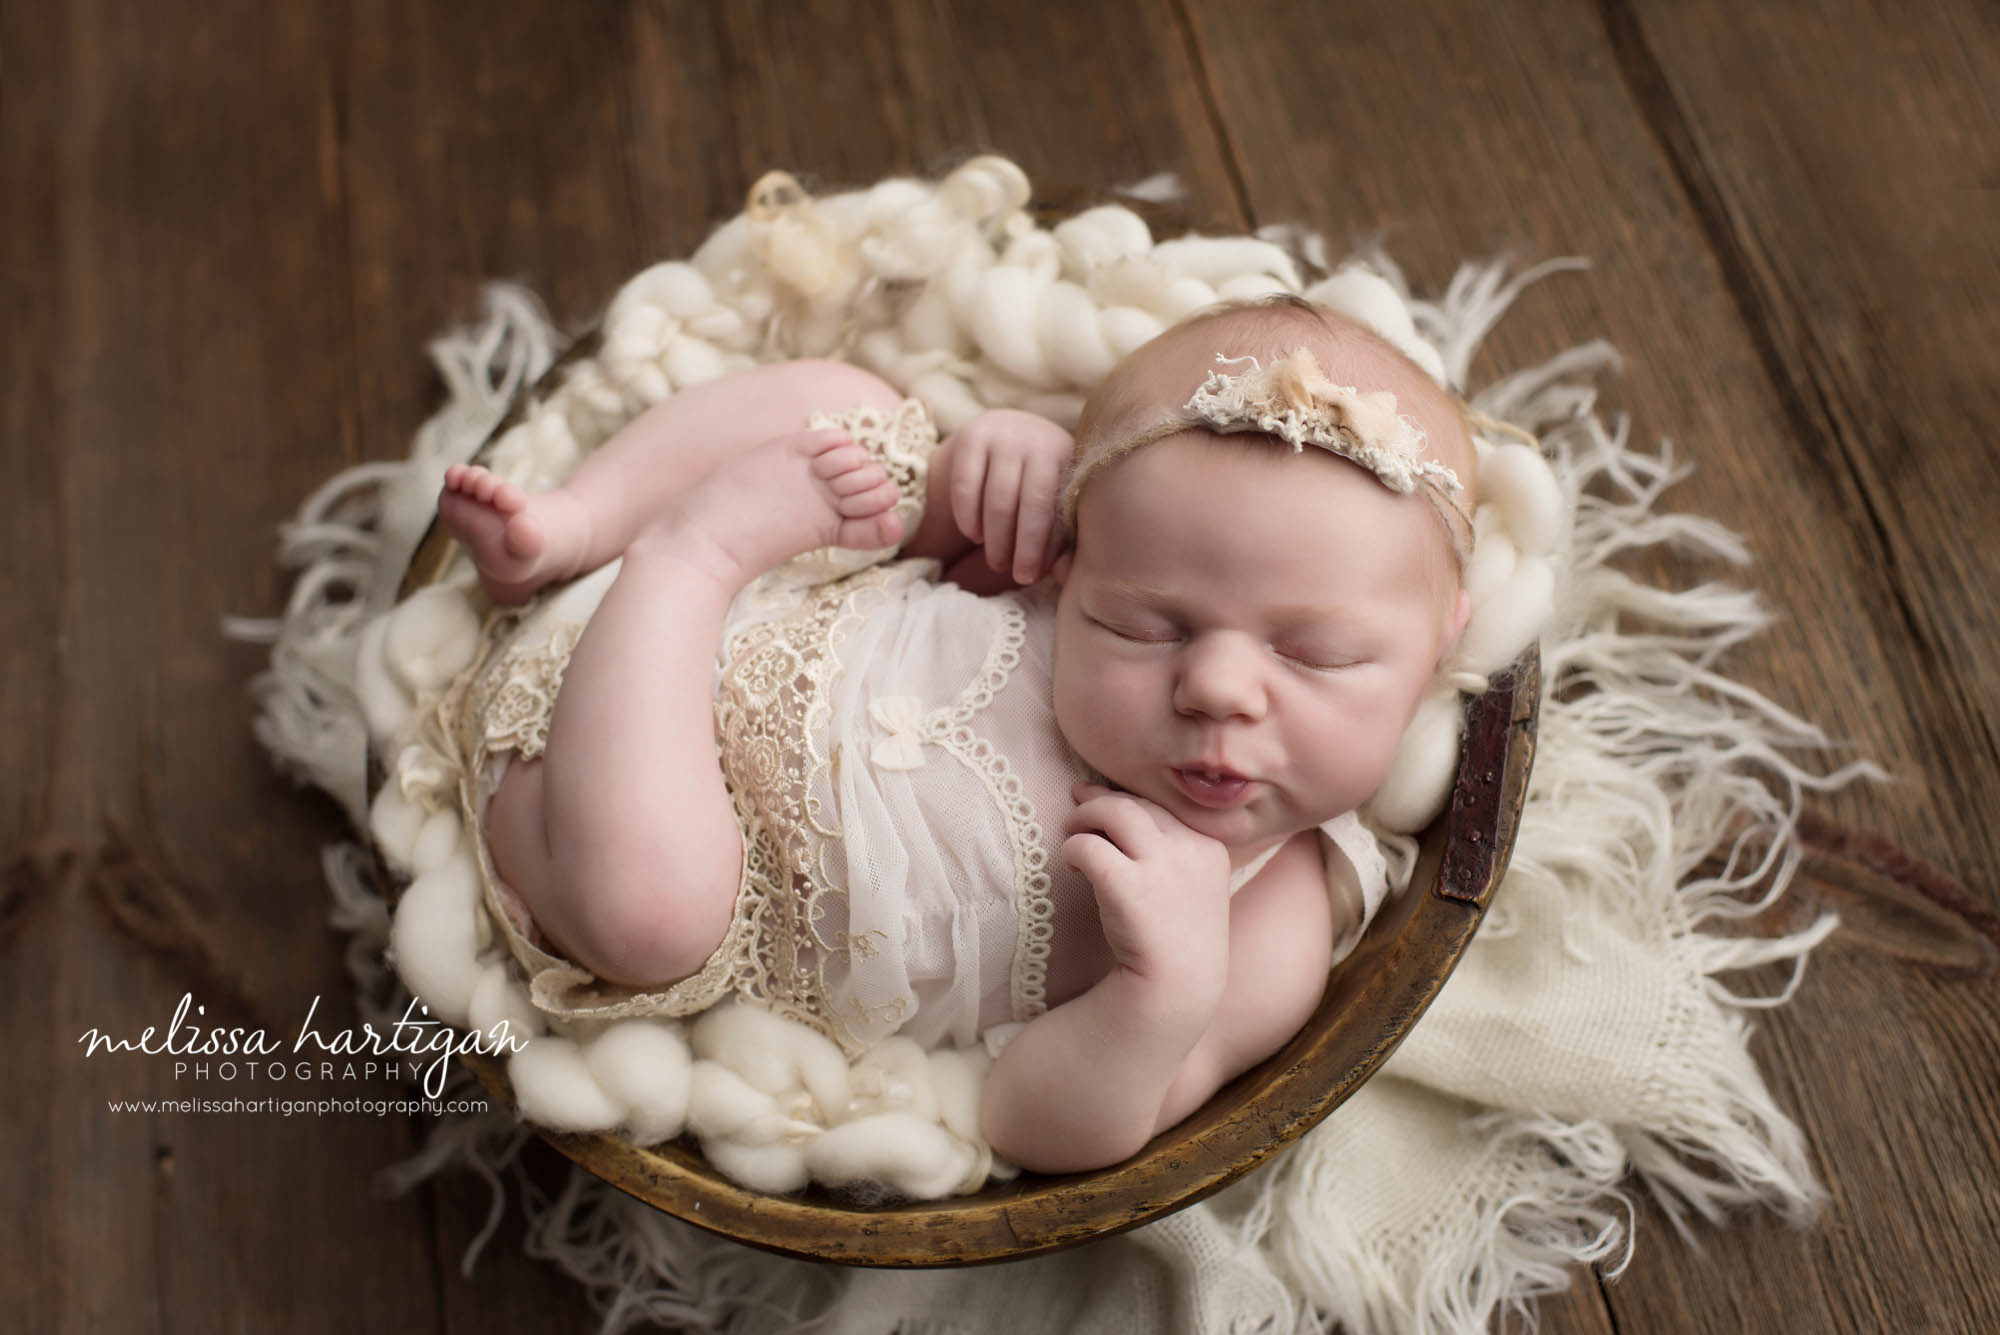 Melissa Hartigan Photography Connecticut Newborn Photographer in Coventry baby girl sleeping in wooden bowl wearing white lace romper making kissy lips